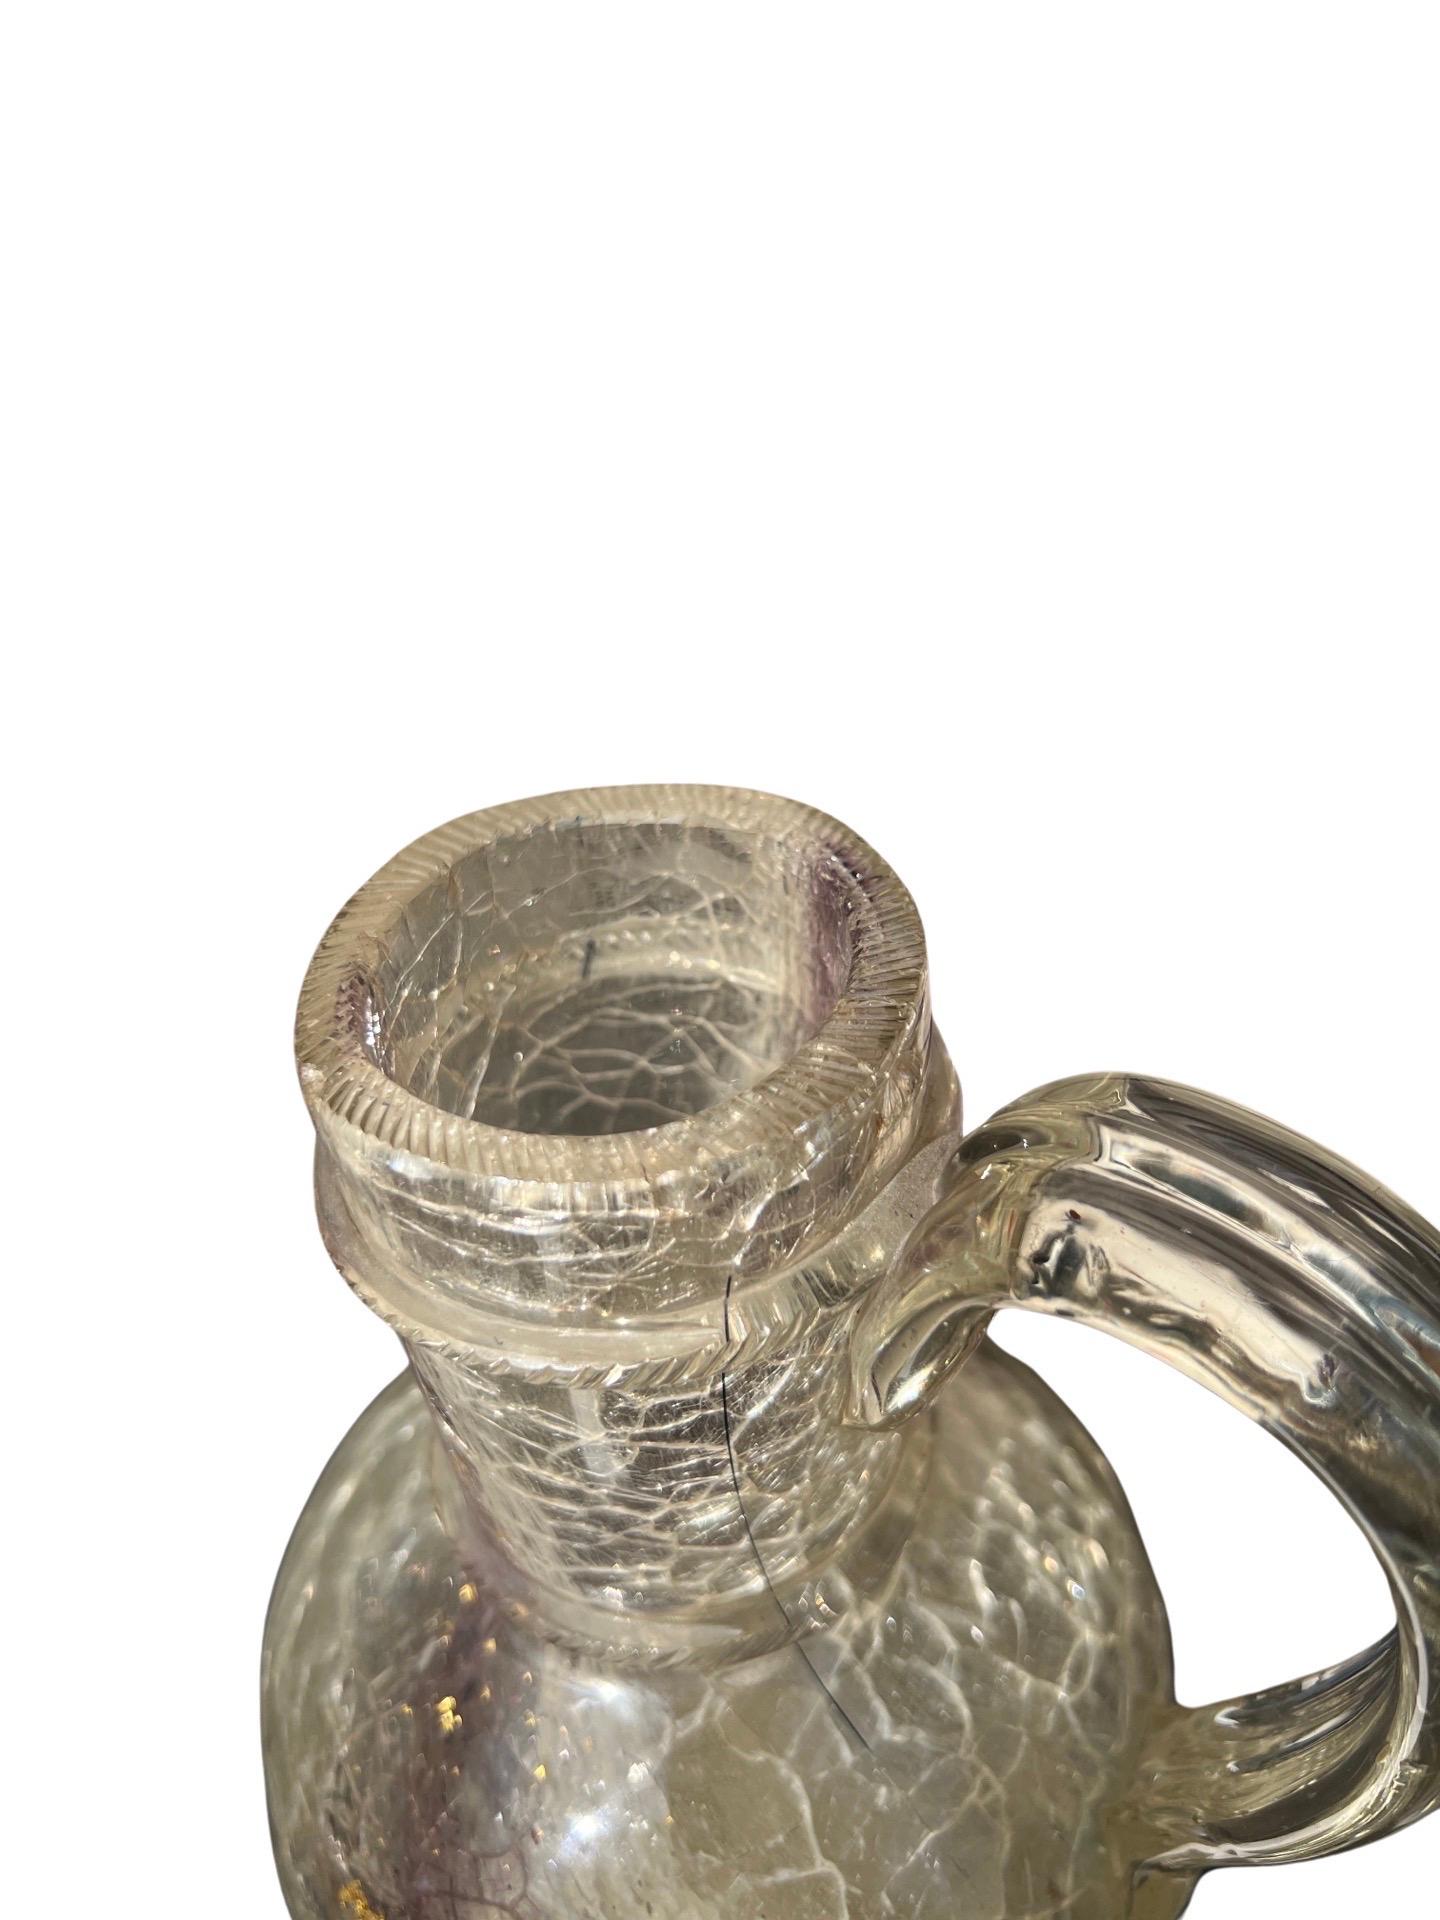 After The Roman Antique - Rock Crystal, Glass & Gold Flecking Grand Tour Pitcher For Sale 4